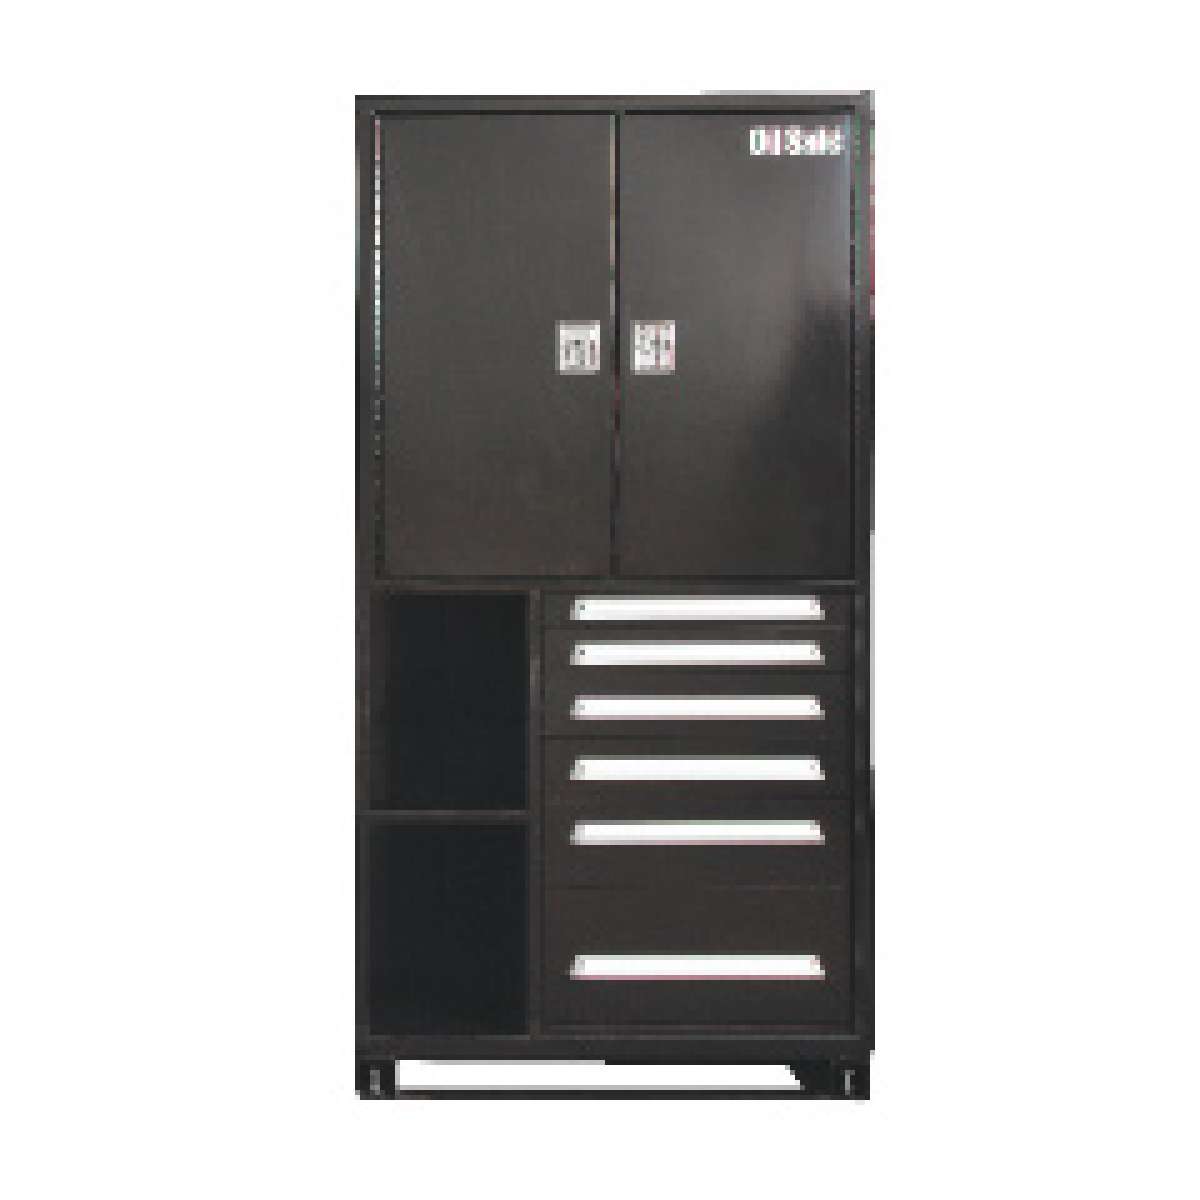 Handle Kit For 1200 Series Storage Cabinets